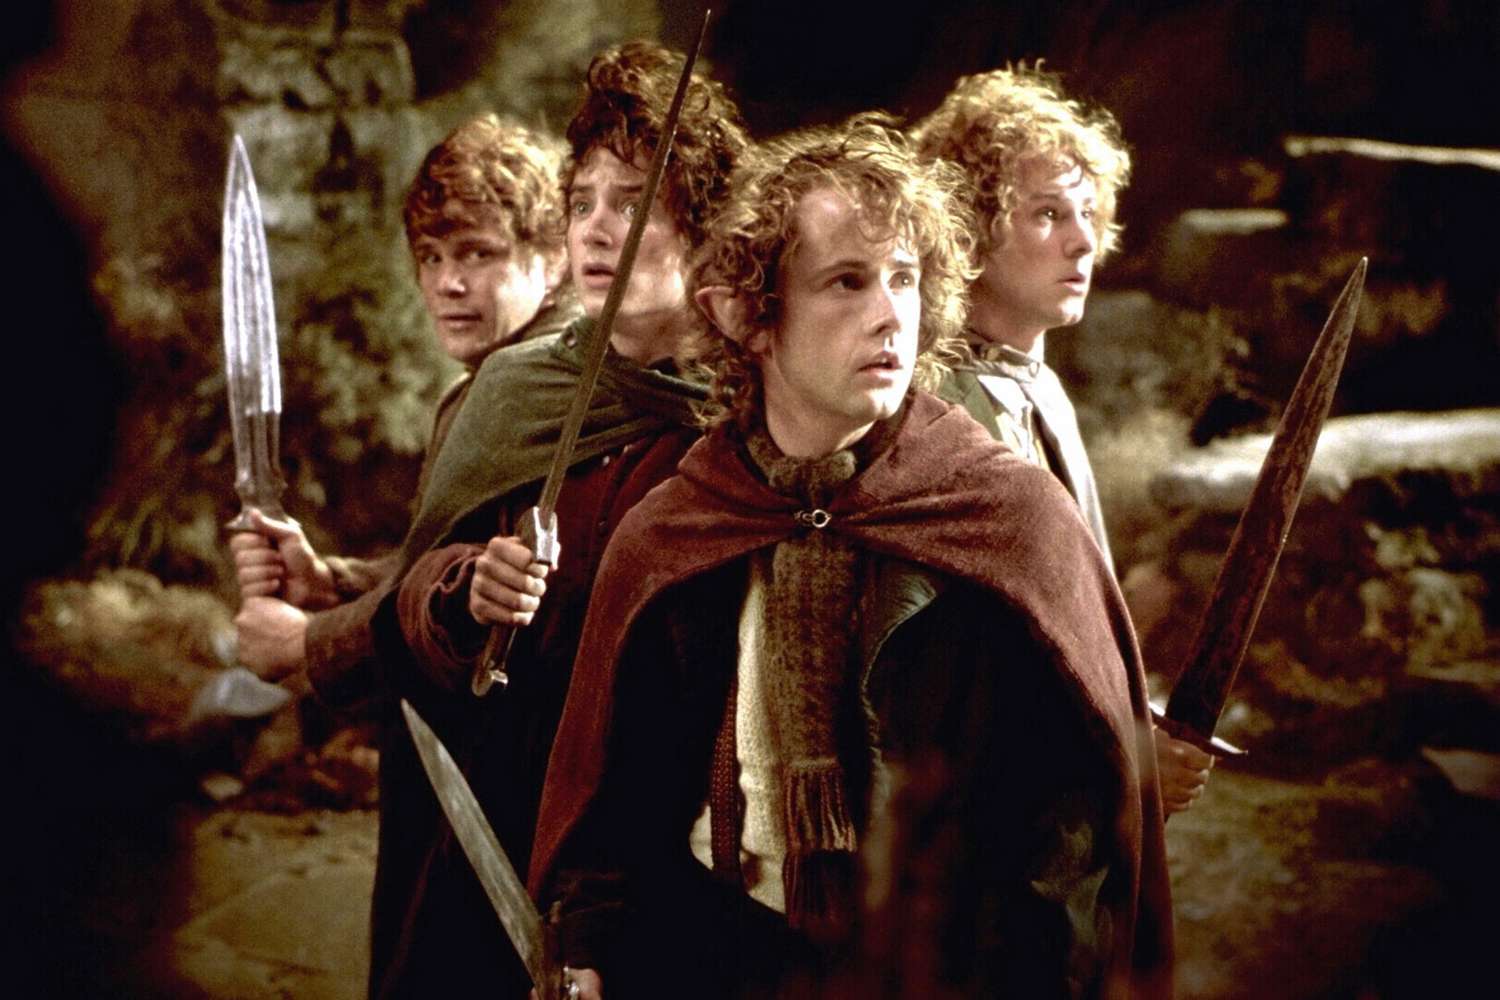 Sean Astin, Elijah Wood, Billy Boyd, and Dominic Monaghan in 'The Lord of the Rings'